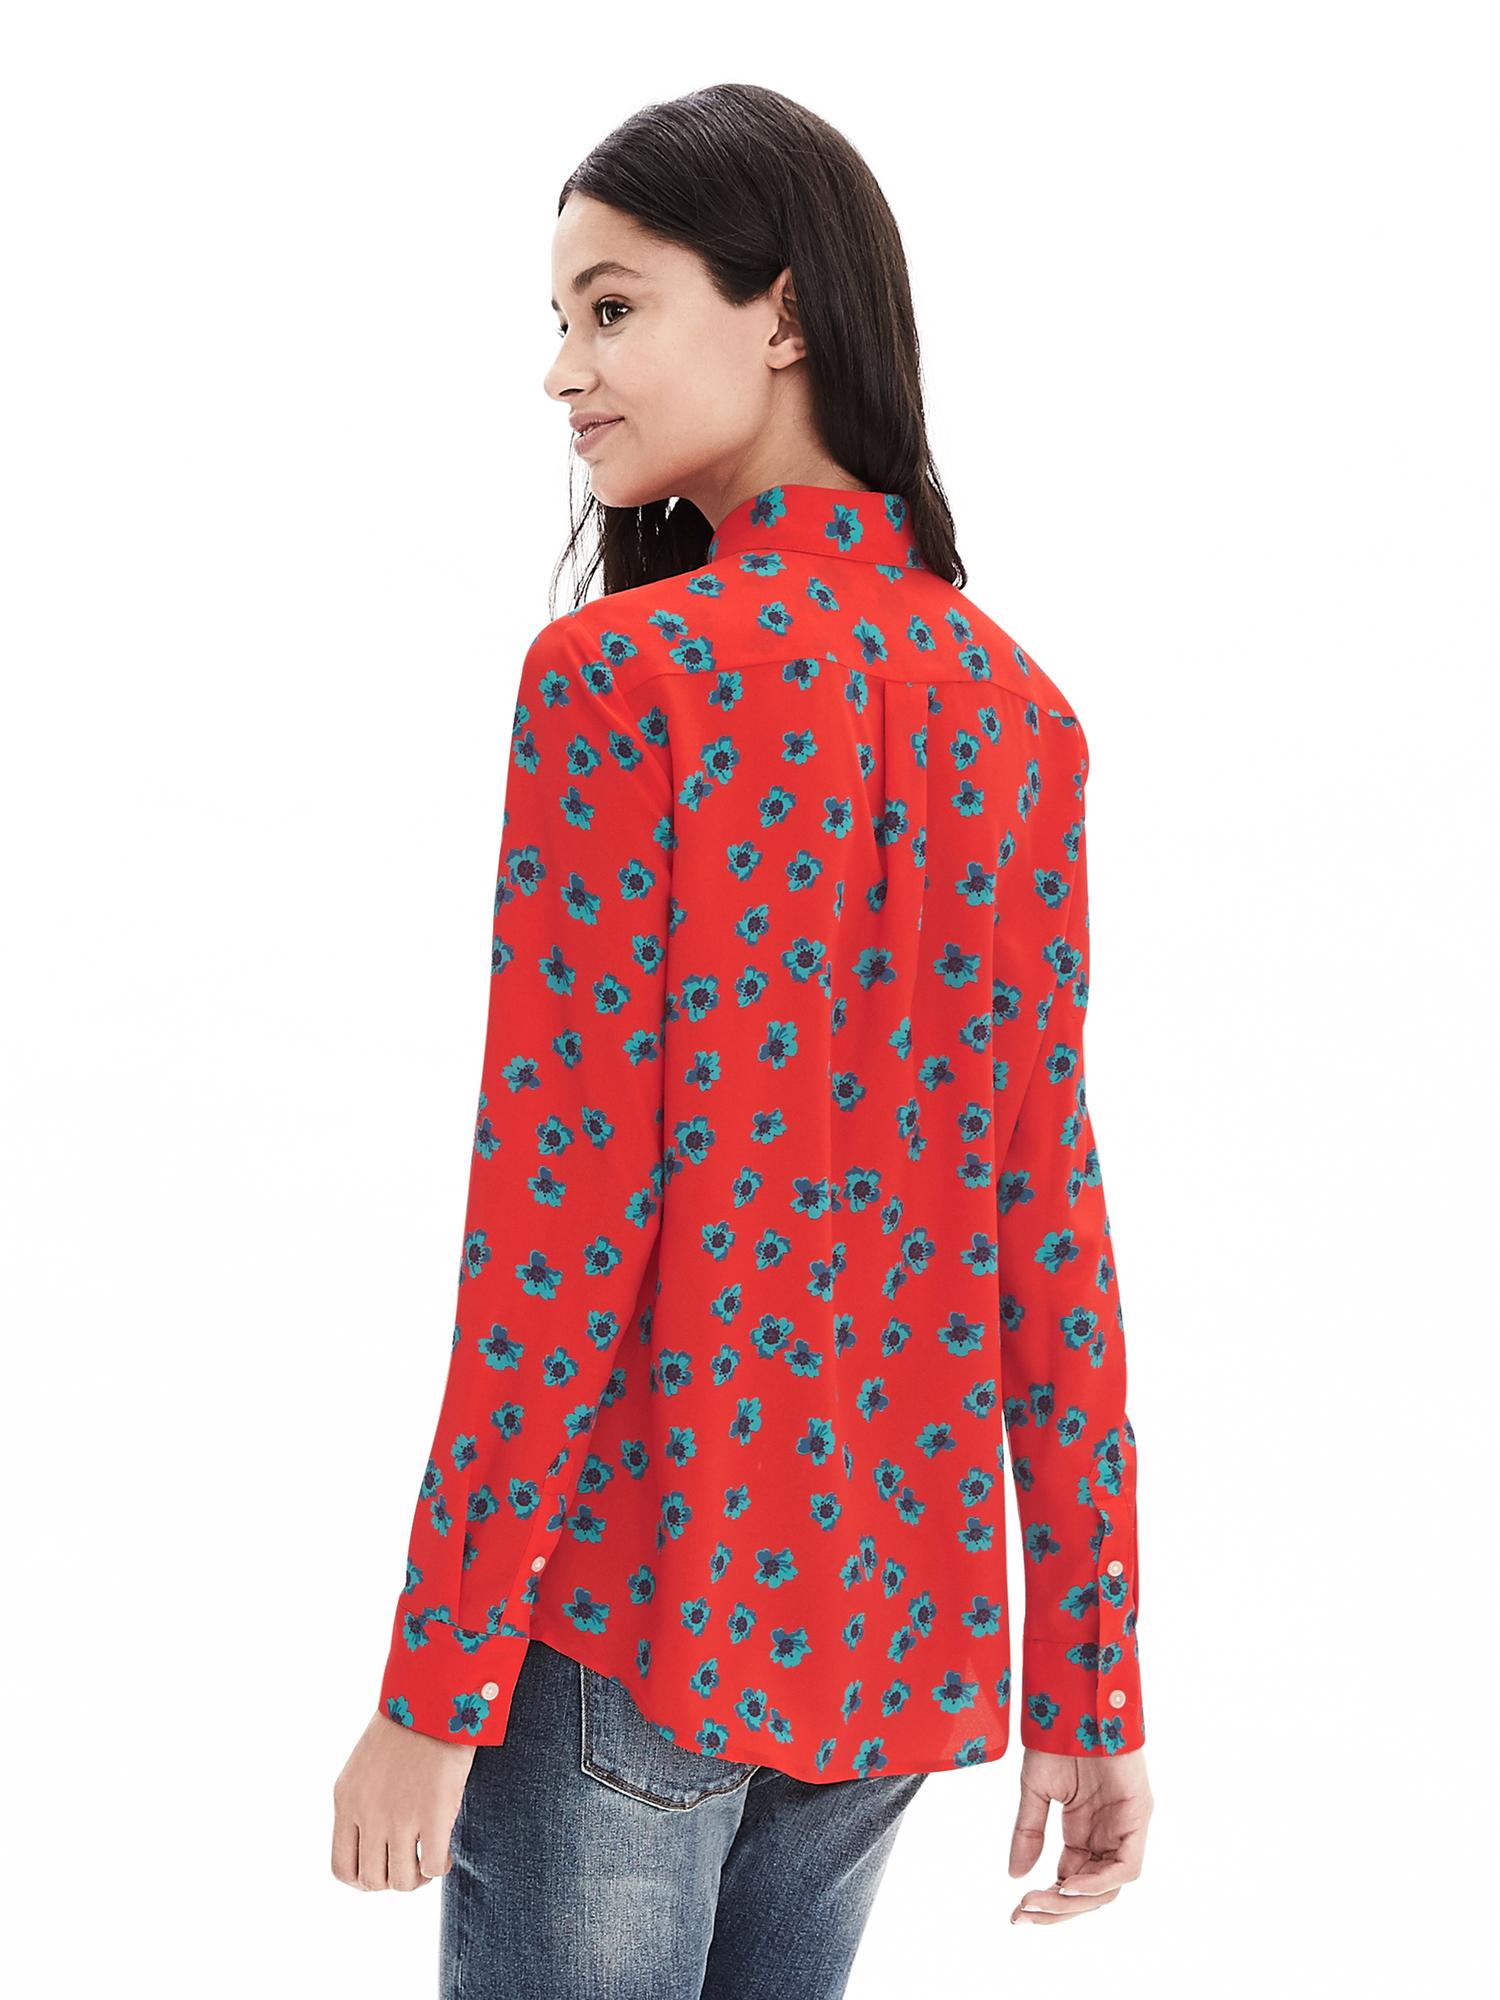 Dillon-Fit Red Floral Blouse